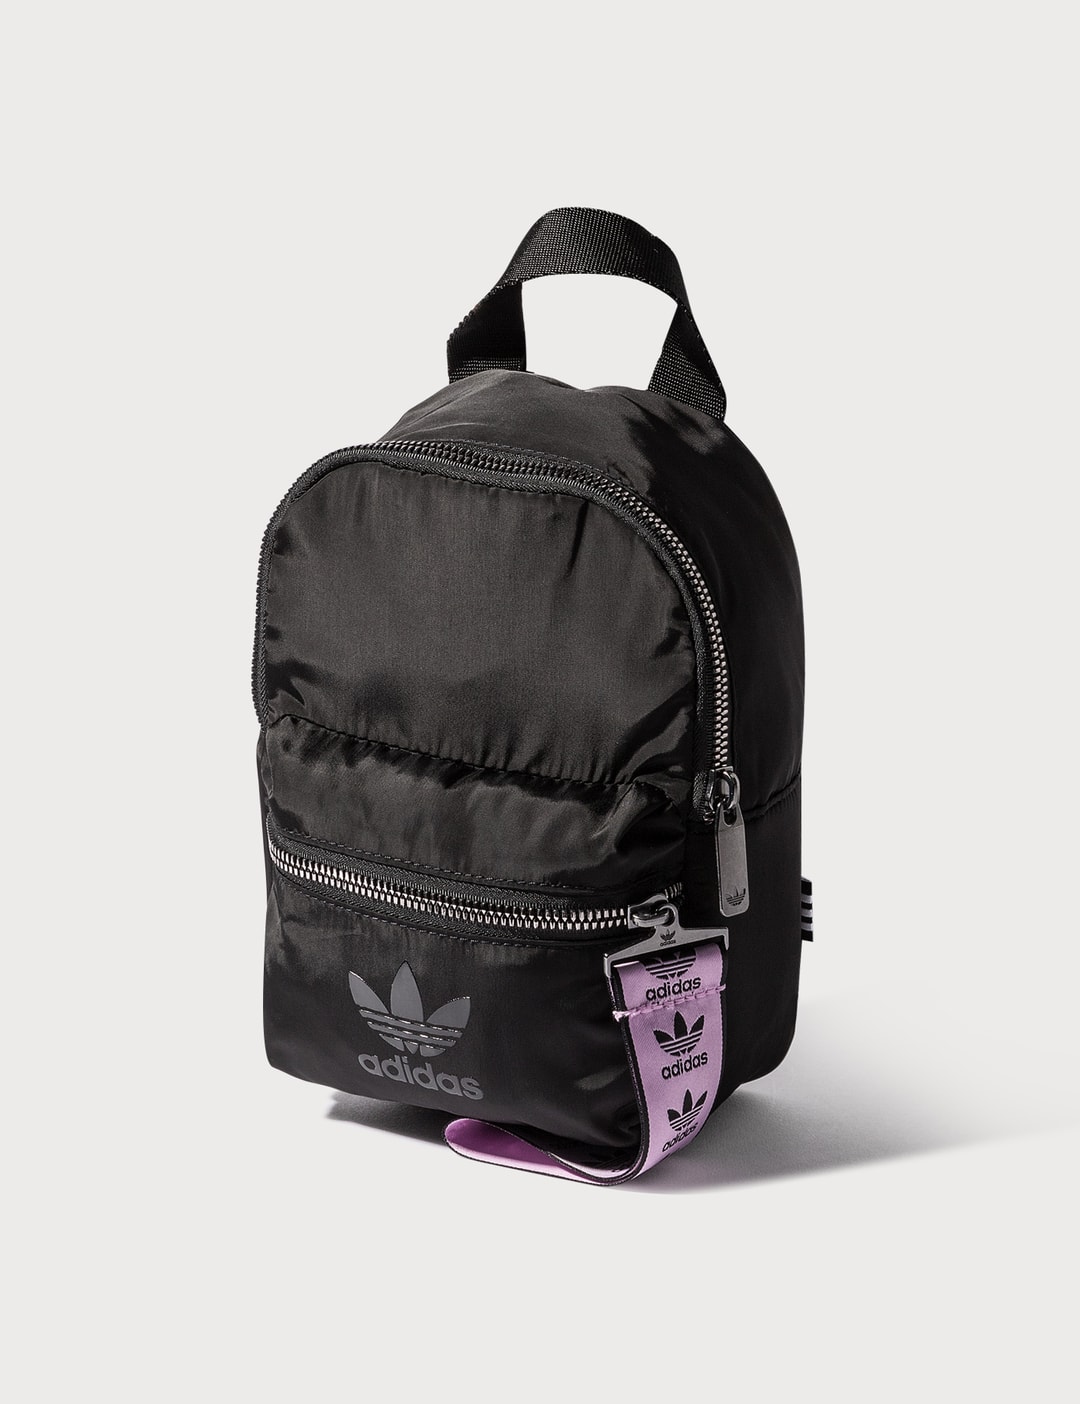 Adidas Originals Mini Backpack | HBX - Globally Curated Fashion and Lifestyle by Hypebeast